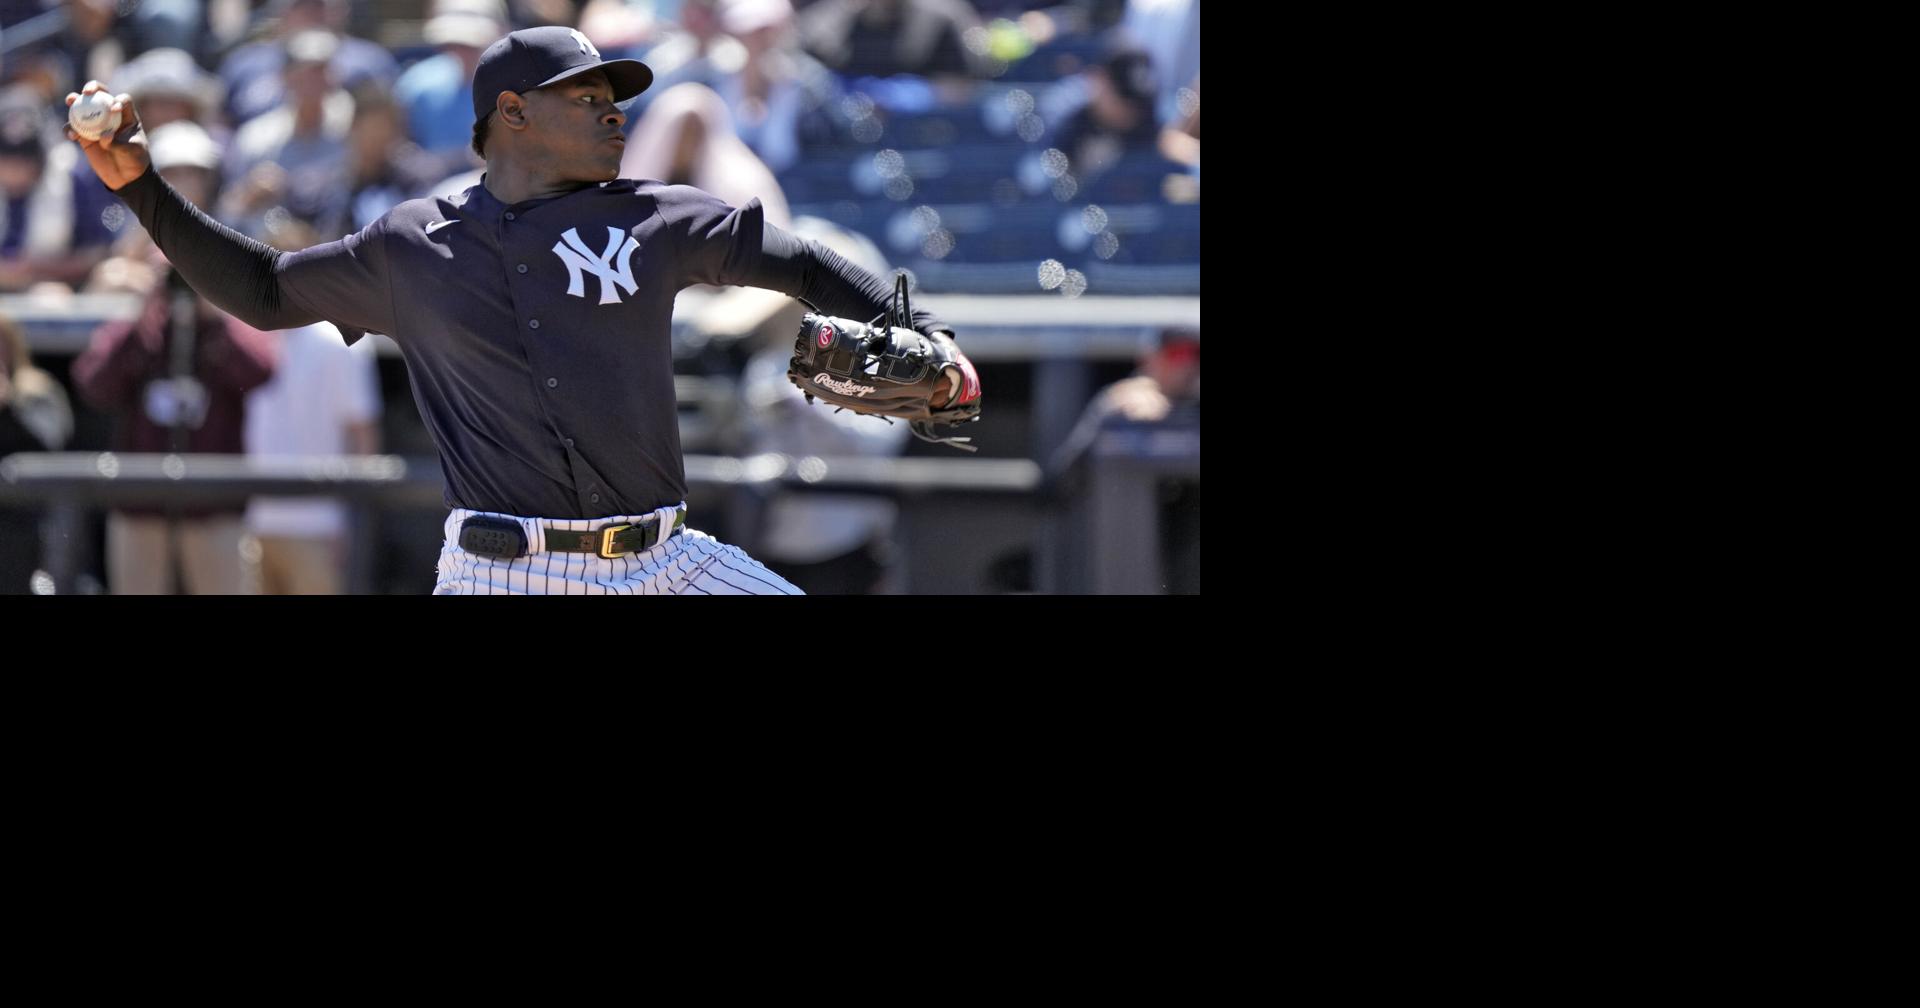 Yankees pitcher Luis Severino has lat strain, likely to start on IL